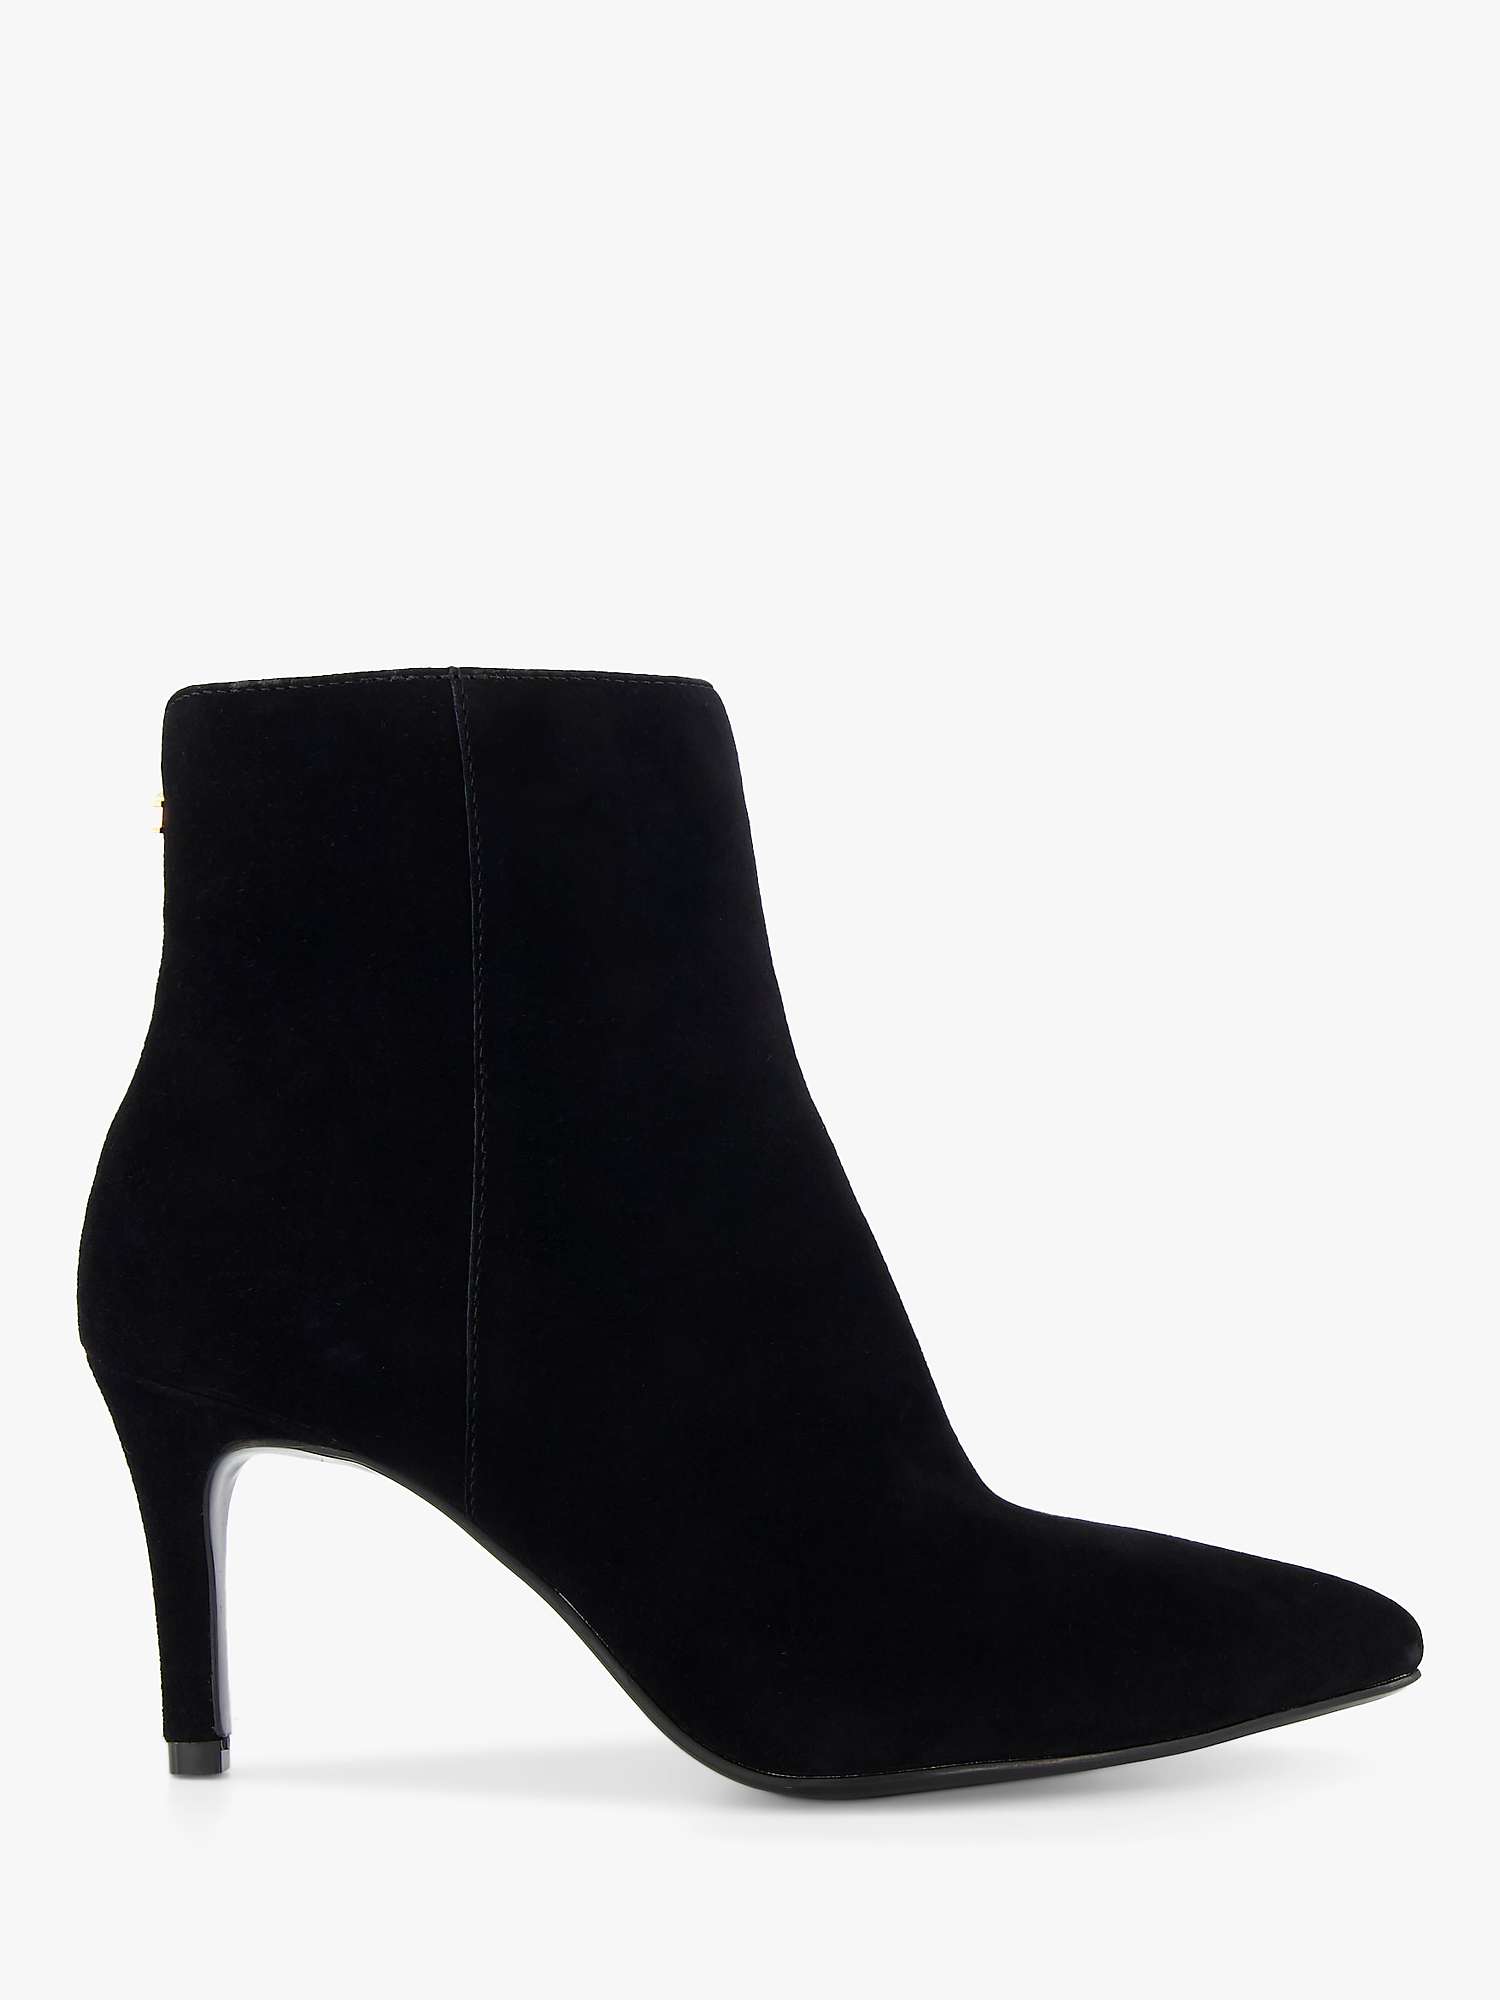 Dune Pointed Boots, Black at John Lewis & Partners